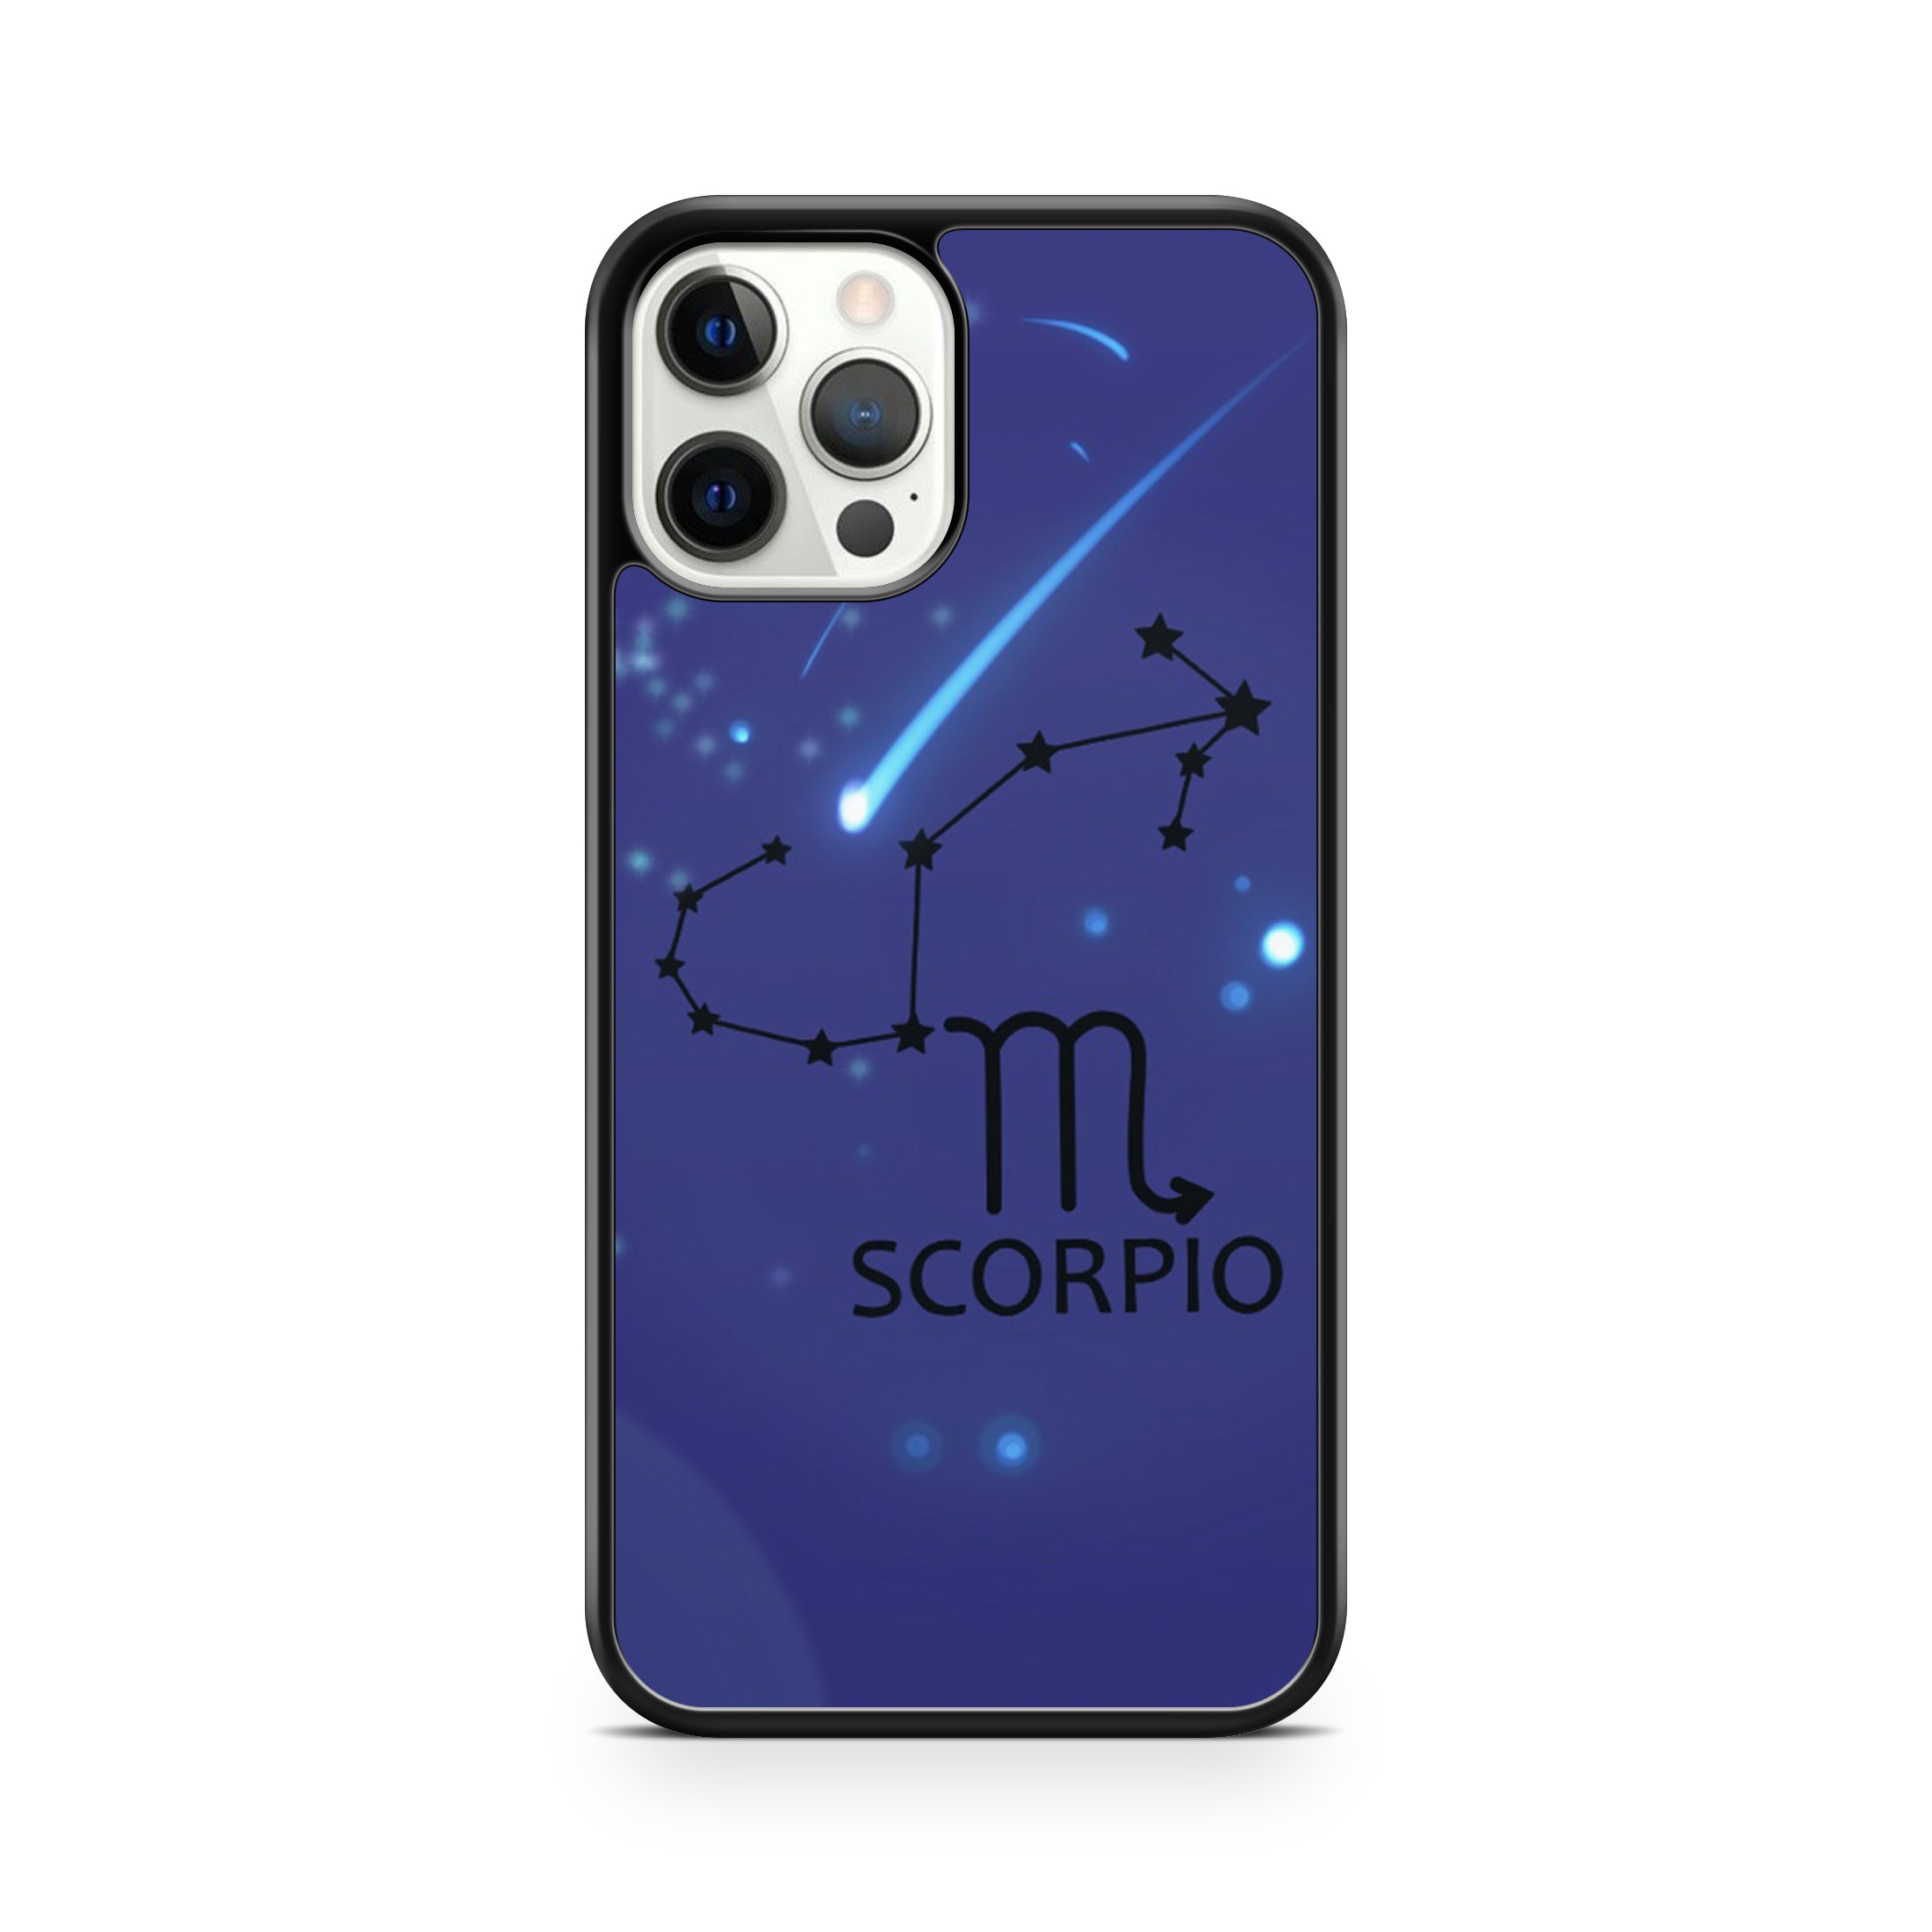 Zodiac Signs Phone Cases - OnTheCase4U